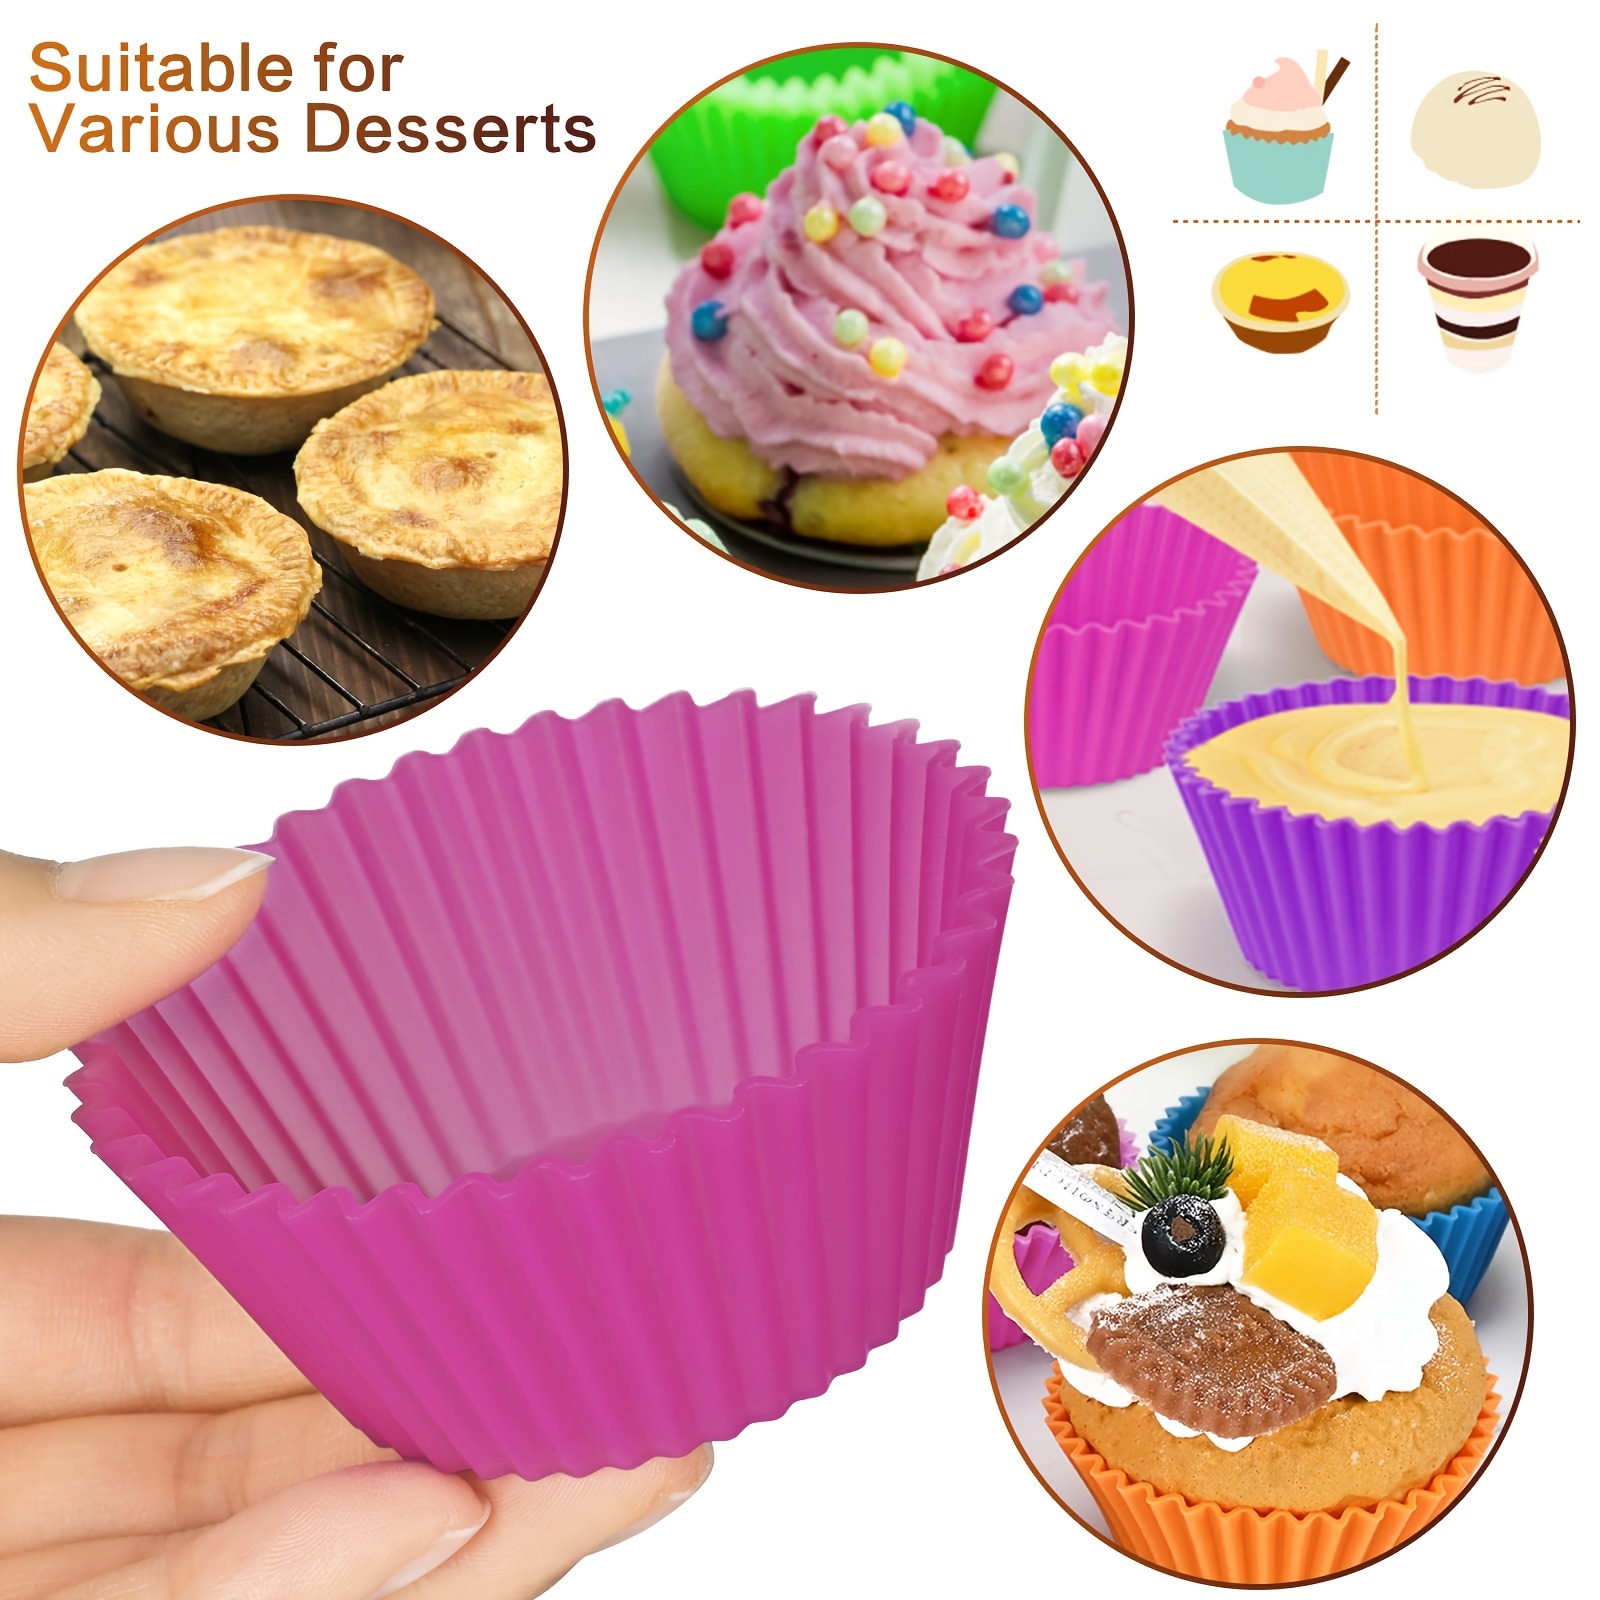 Silicone Cupcake Molds KITCHEN CRAFT SILICONE CUPCAKE BAKING CUPS, PACK OF  12 ONLY $4.17 SHIPPED!